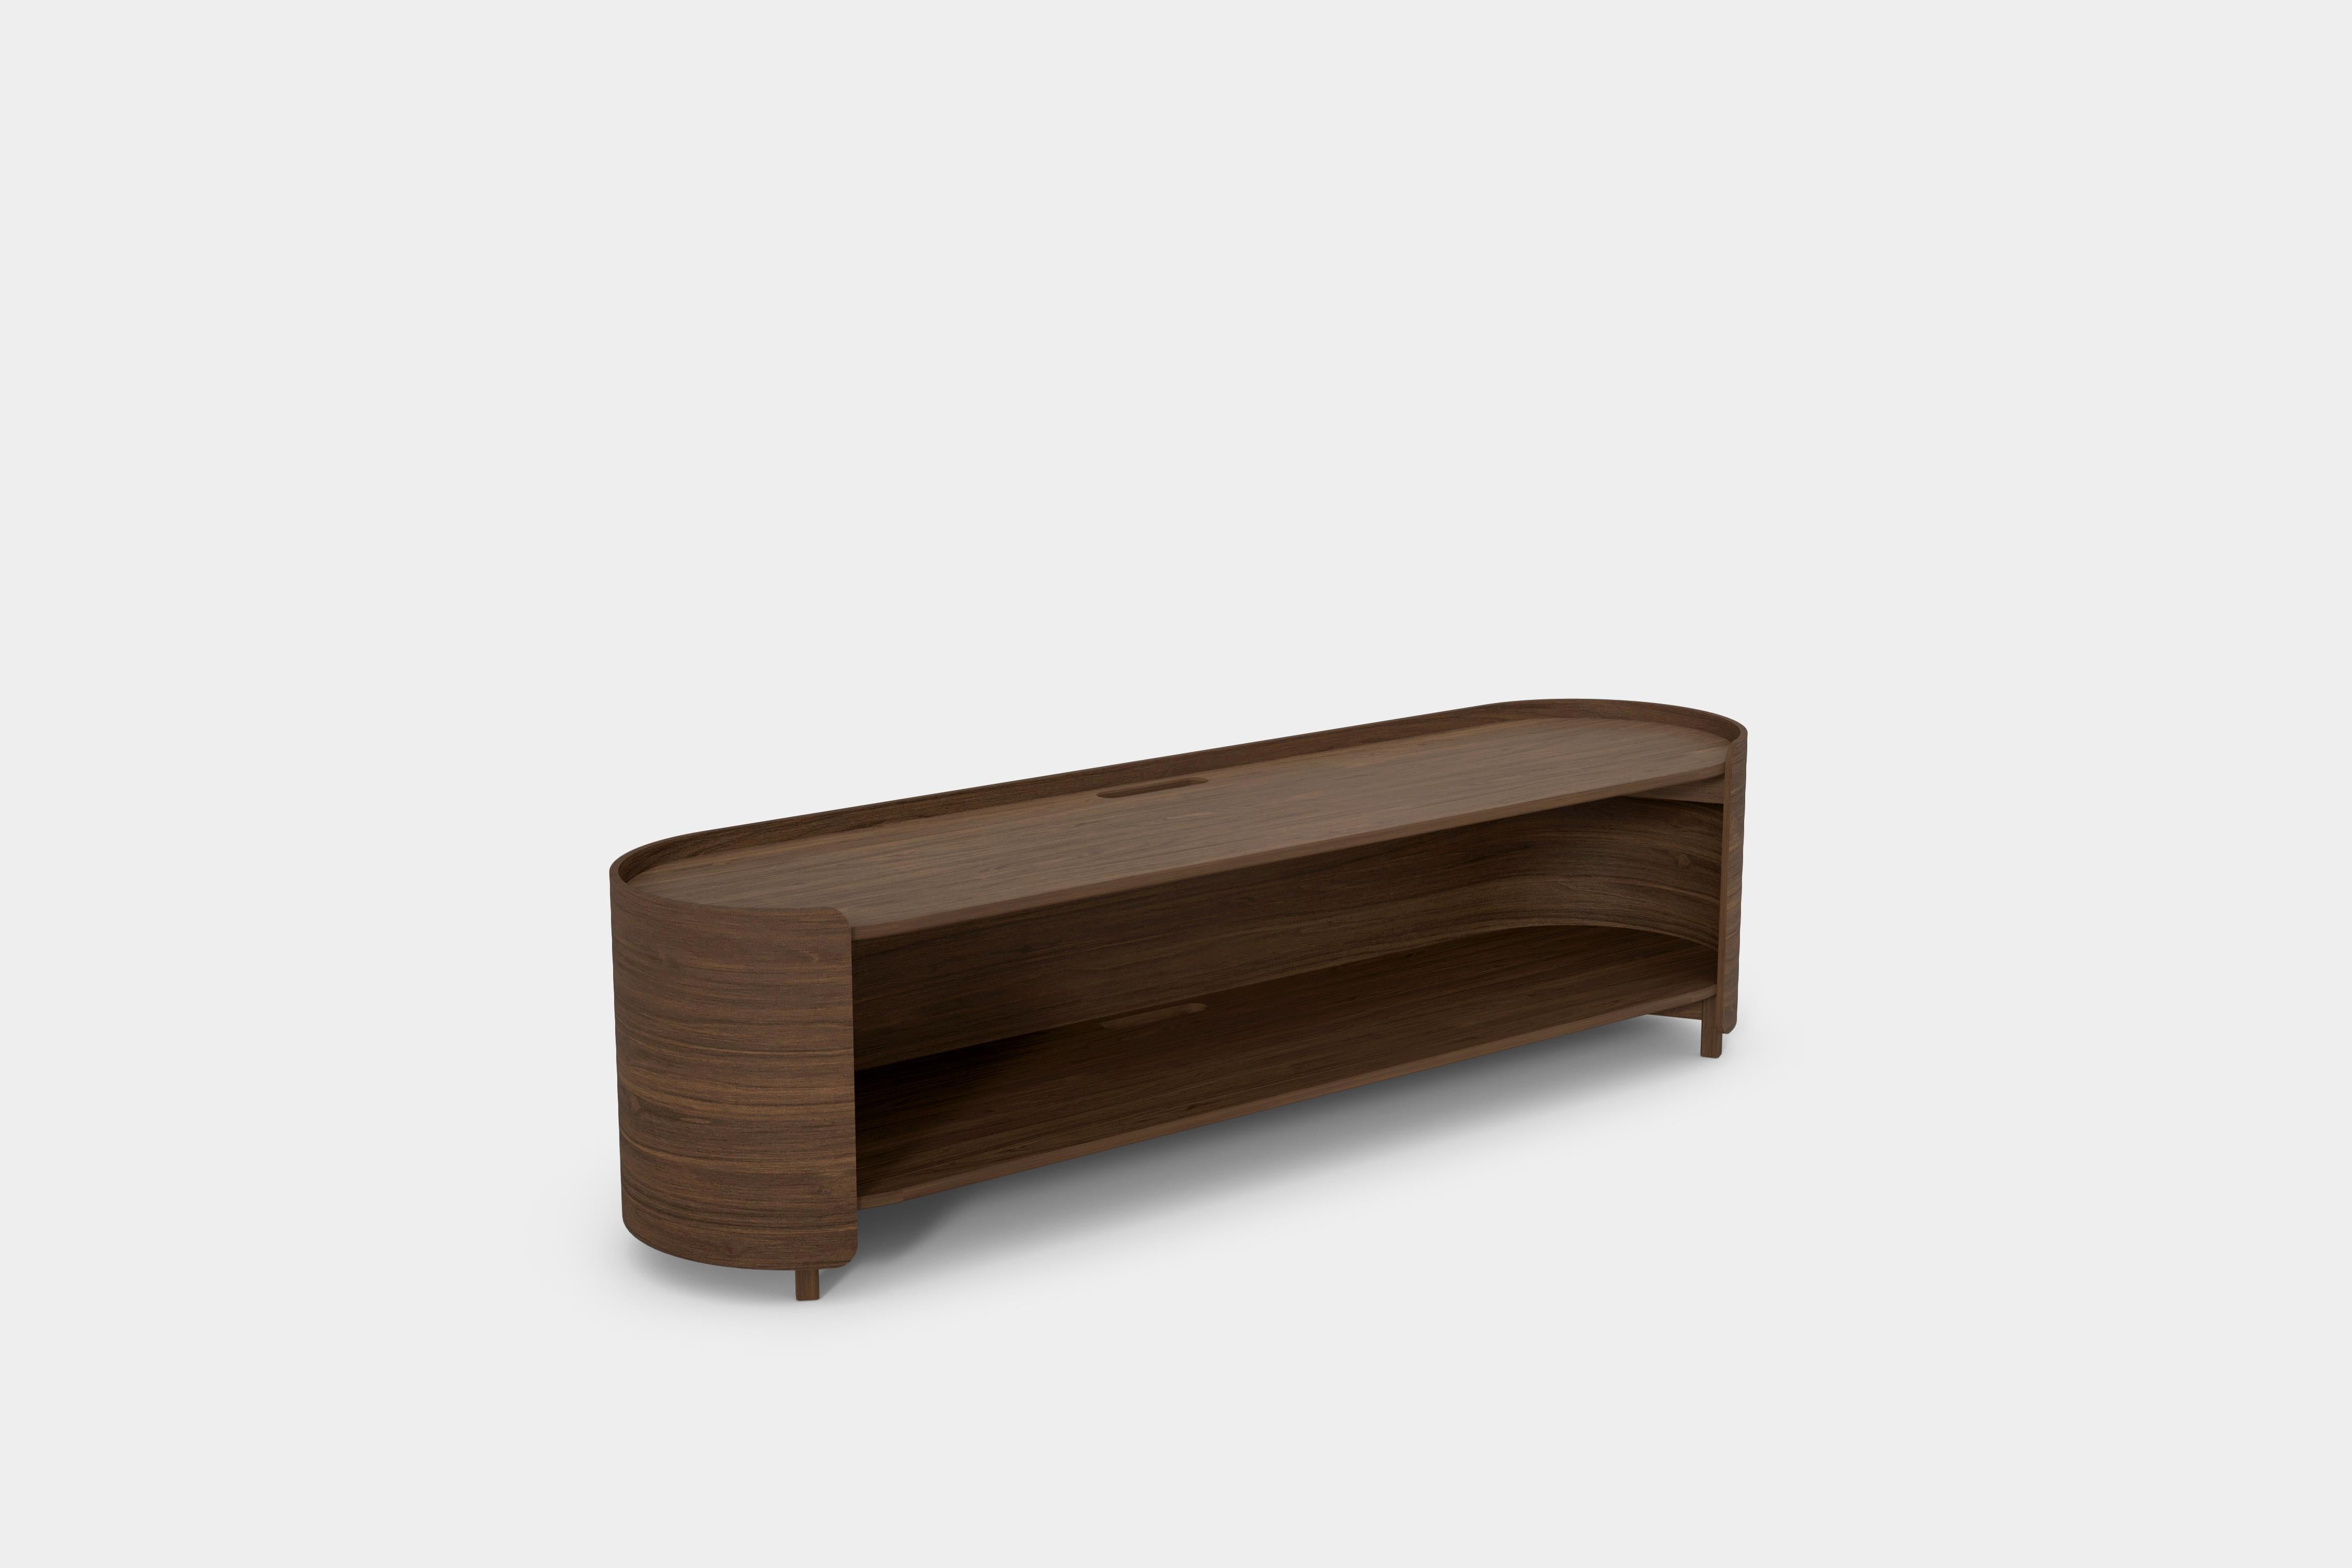 Prima Tv Cabinet, Media Unit, Credenza in Walnut Wood Veneer by Joel Escalona

Prima Collection is born under the idea of creating fundamental pieces for the home, those that you simply cannot imagine your space without.

Prima TV Stand provides a